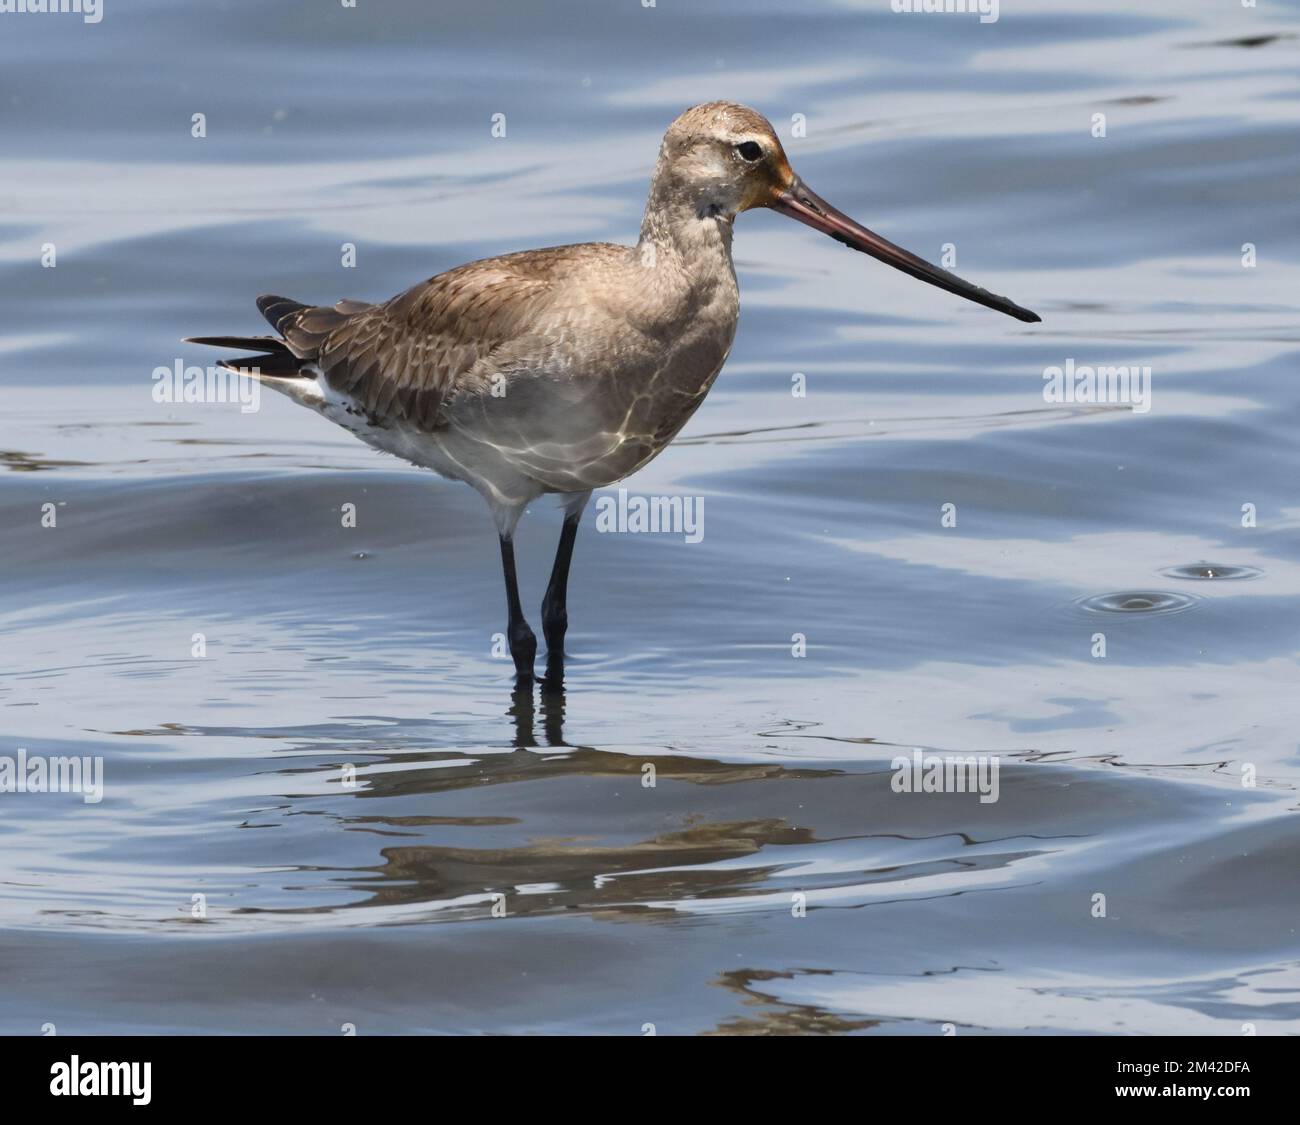 A Hudsonian godwit (Limosa haemastica) searching for invertebrates in the shallow sea off the beach close to Paracas. Paracas, Peru. Stock Photo